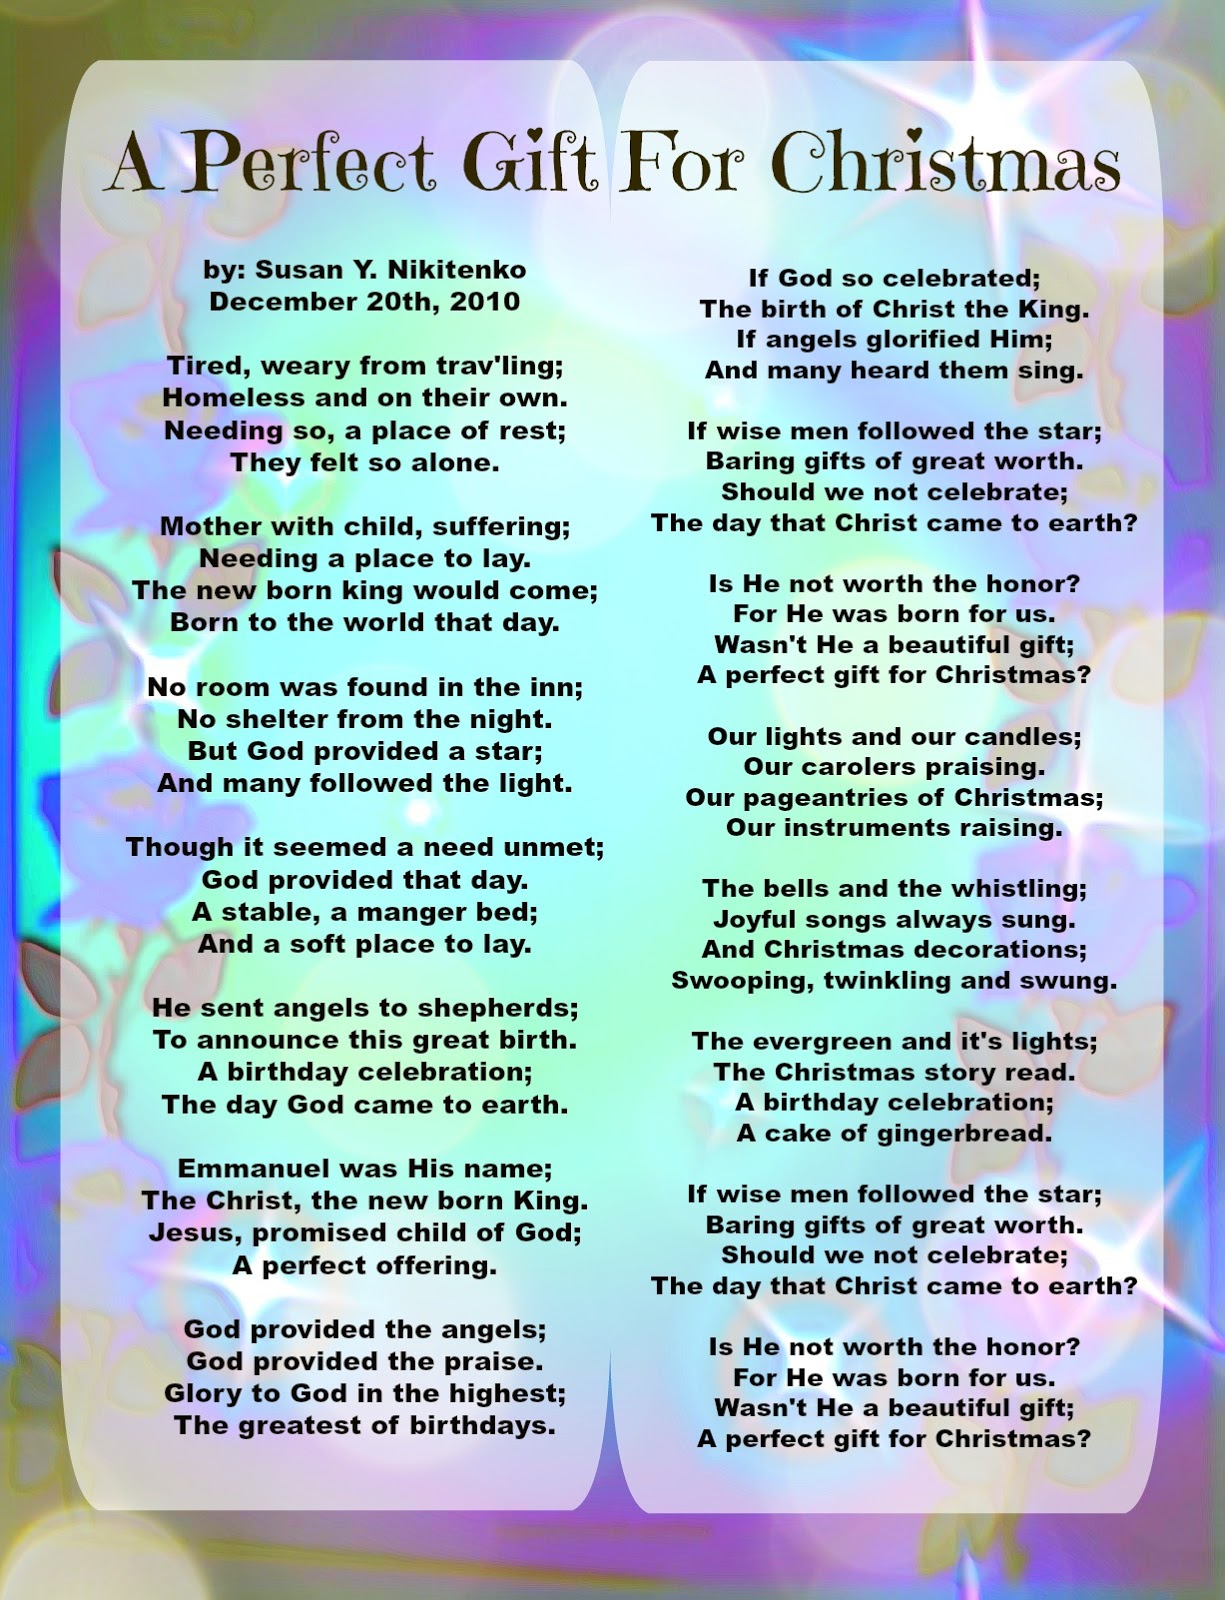 christian-images-in-my-treasure-box-christmas-poem-poster